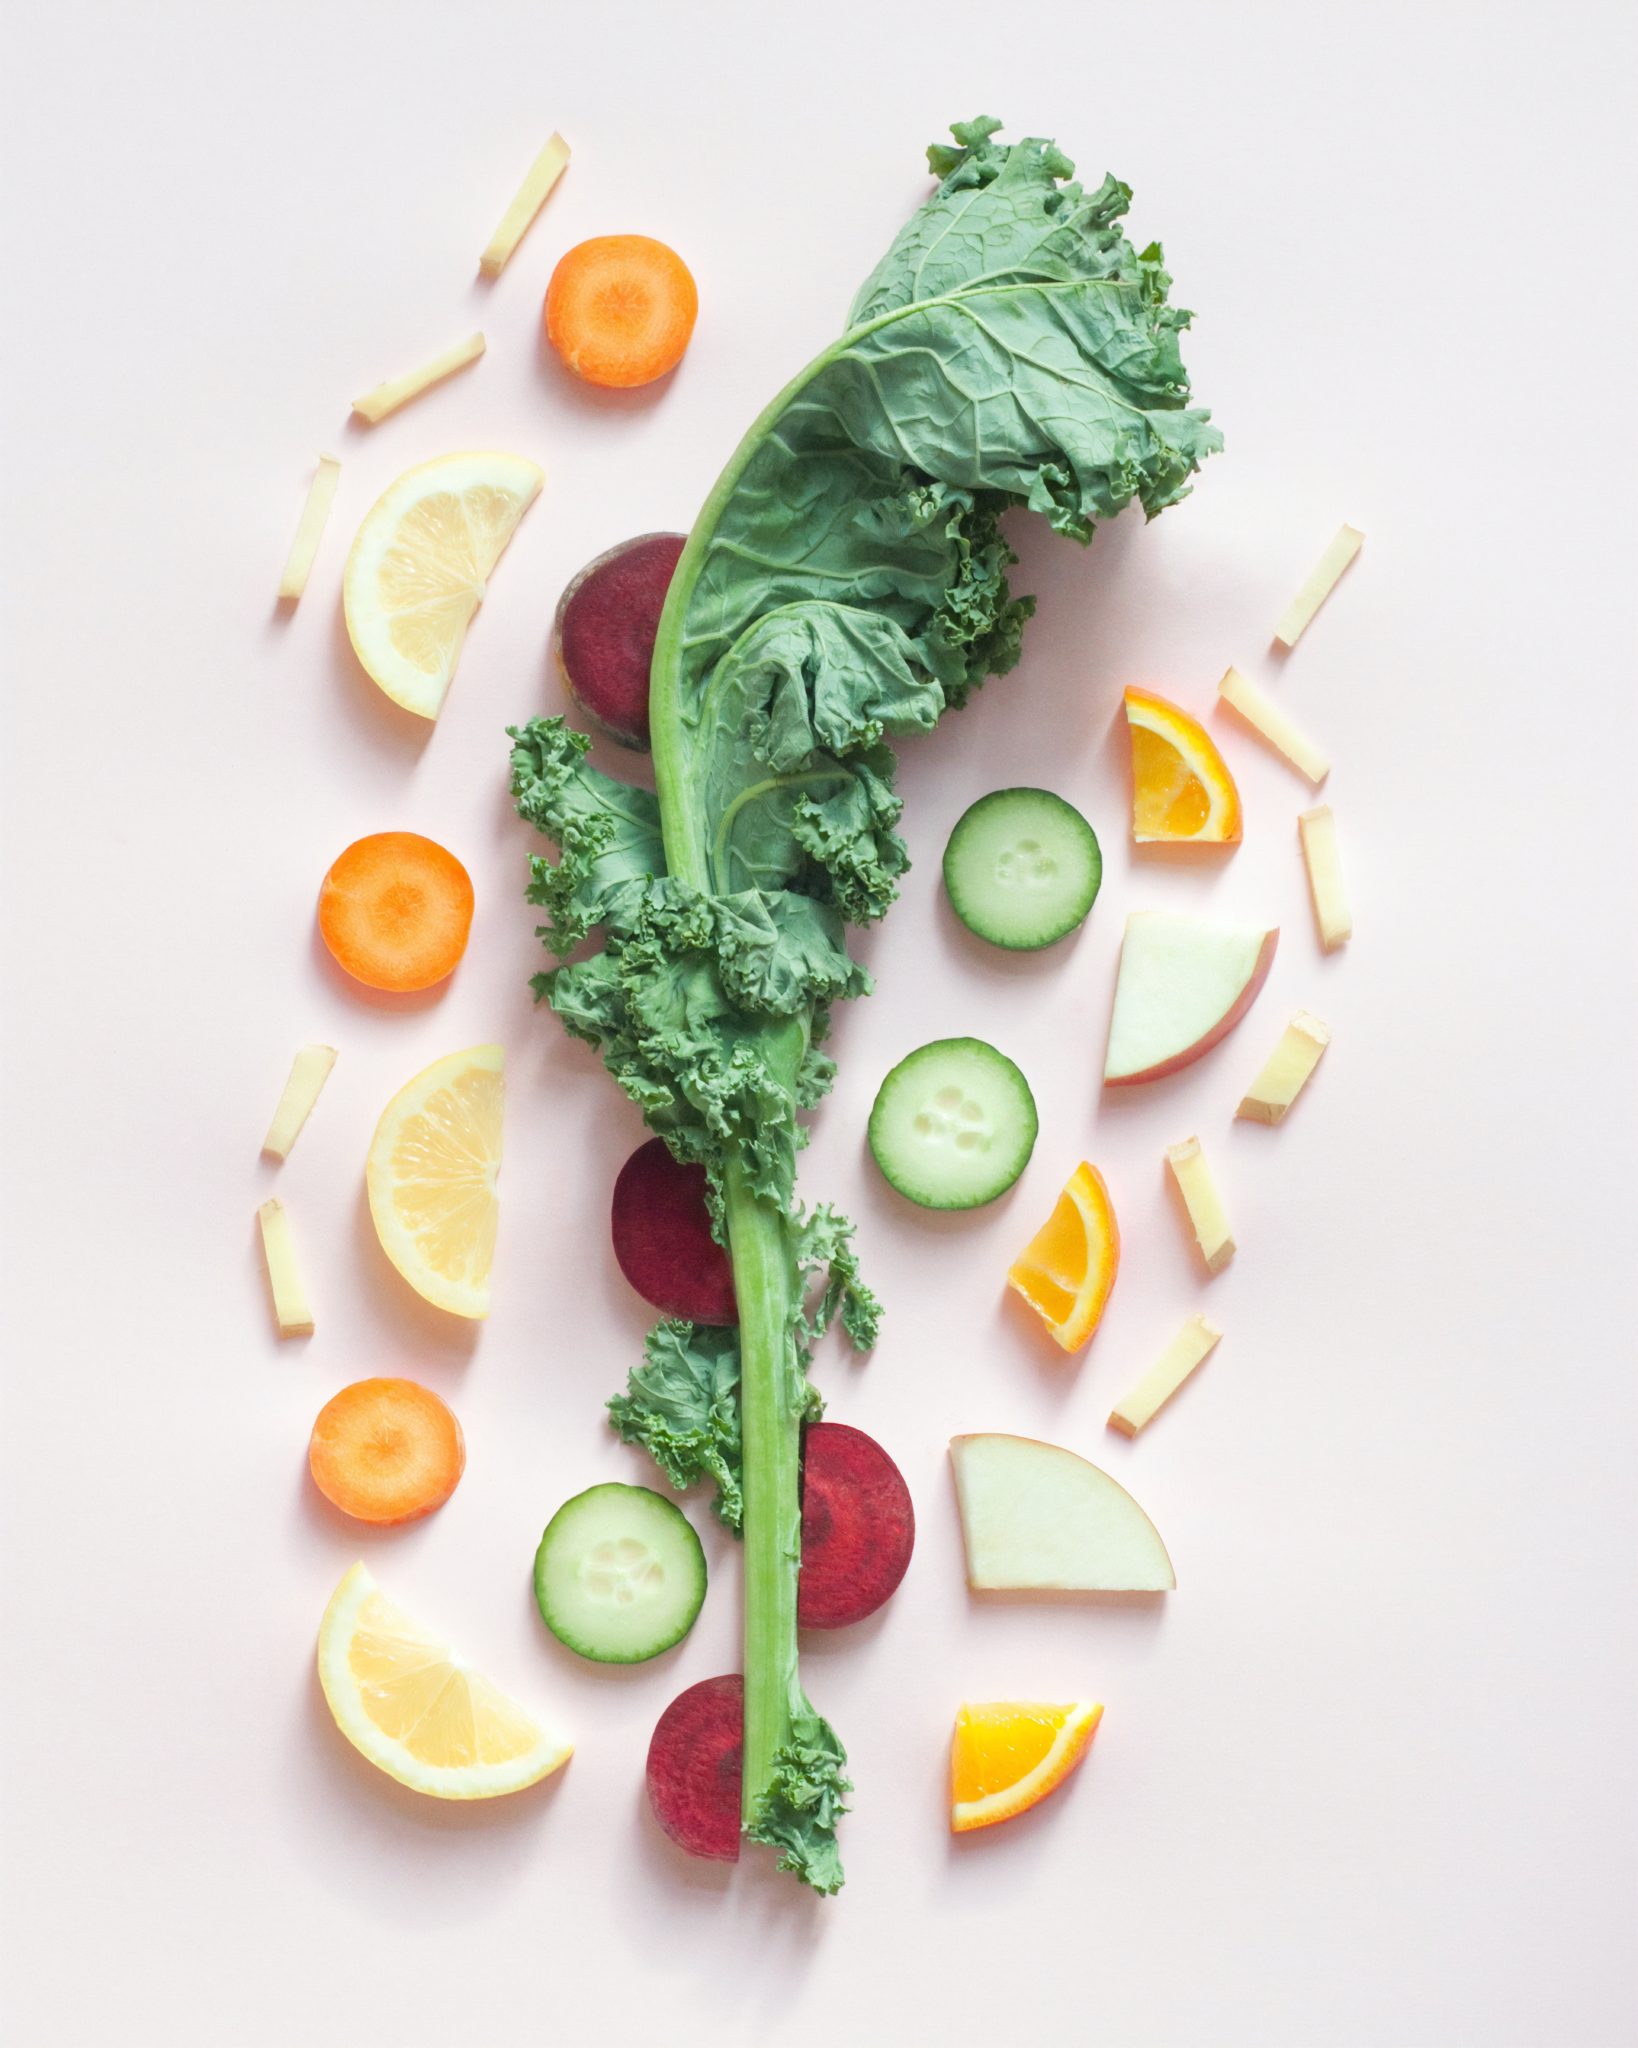 A kale stem on top of chopped fruits and vegetables representing the pegan diet